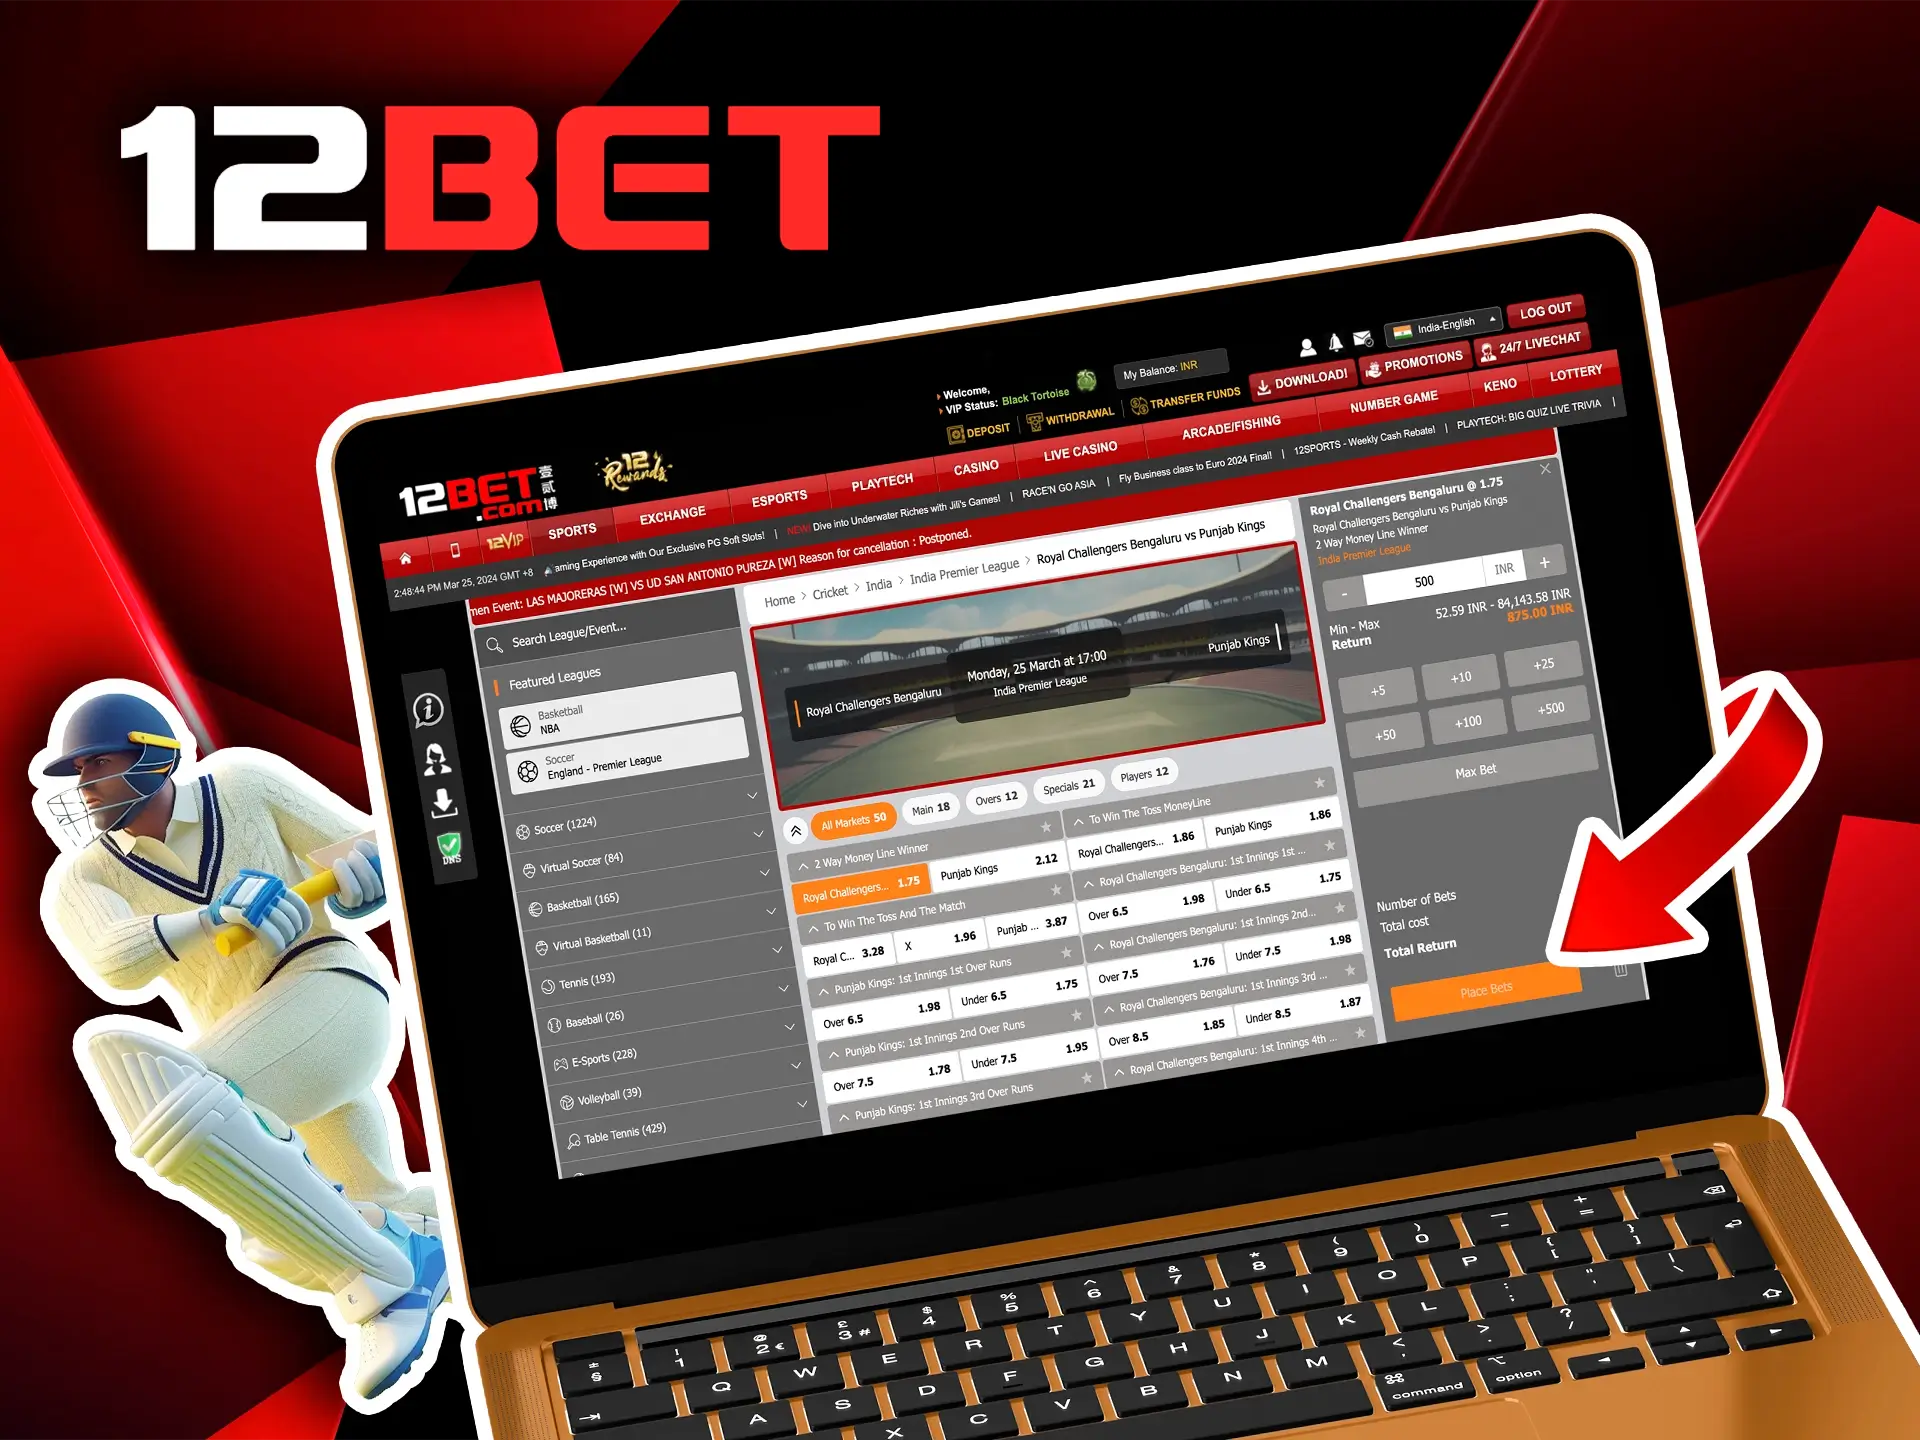 Make your first deposit and immerse yourself in the world of cricket betting at 12Bet.